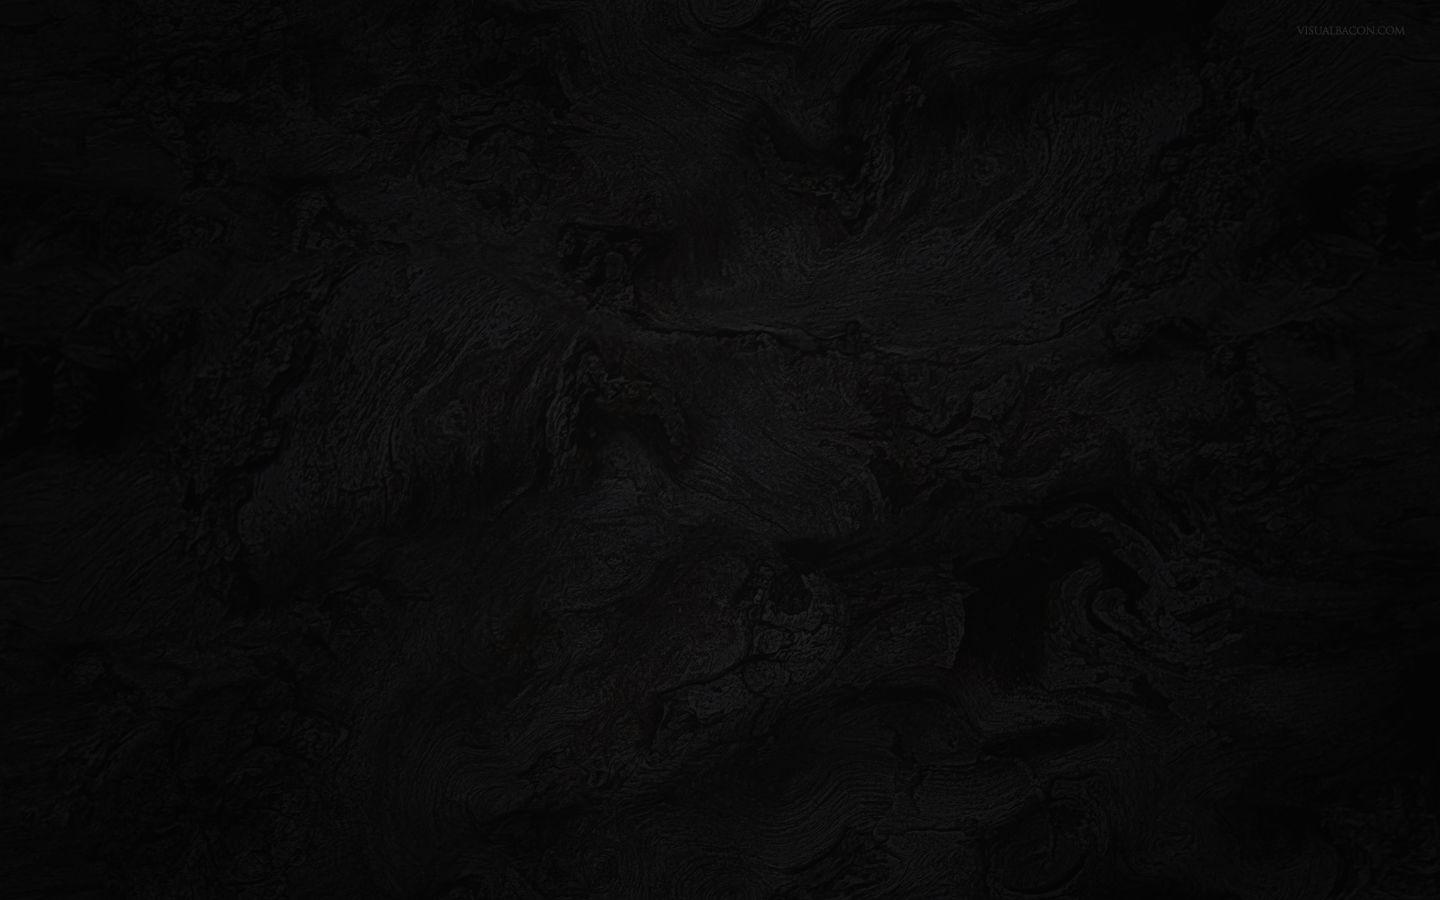 Dark Grey Background Texture 04 Put And Discus Techniques